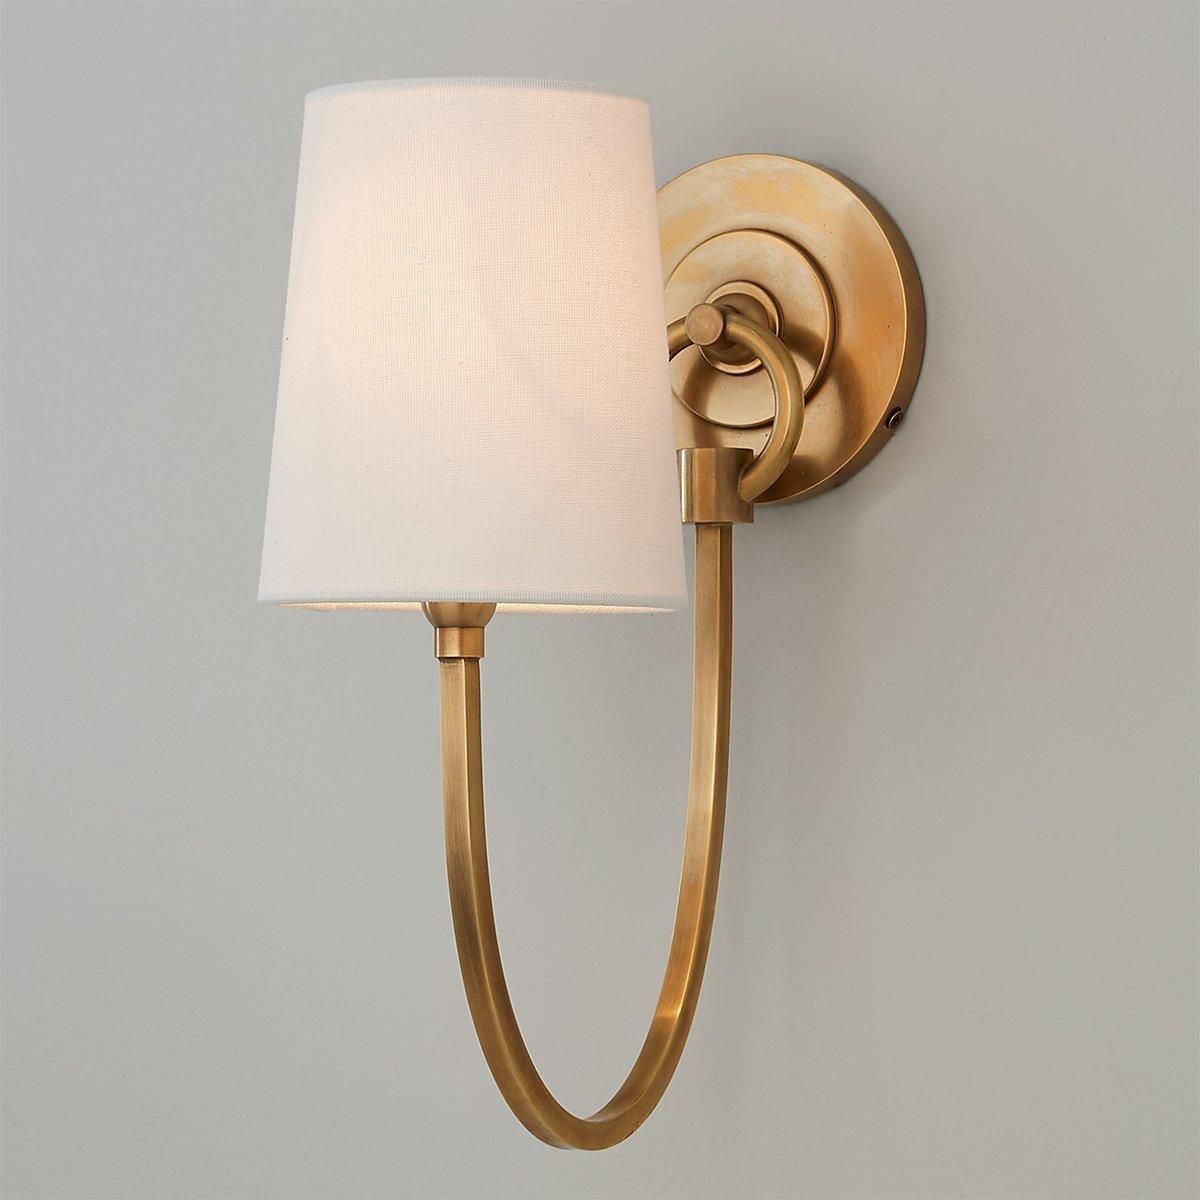 Swag Sconce - 1 light | Shades of Light